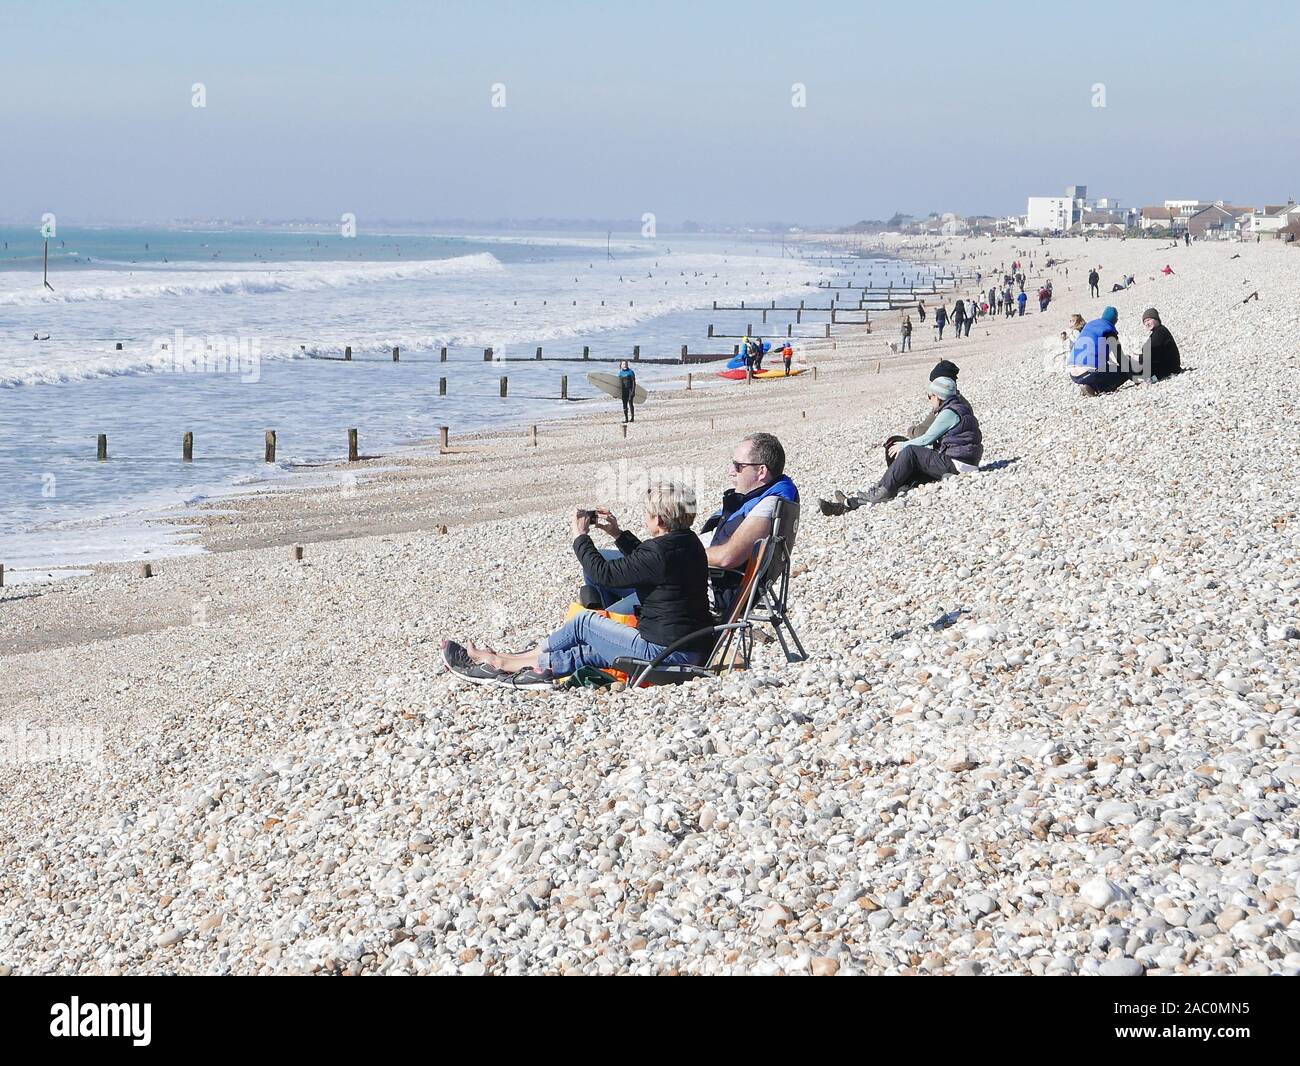 Winter surfing at Selsey beach in February 2019 with people sitting on the beach watching, sea groins in the background Stock Photo